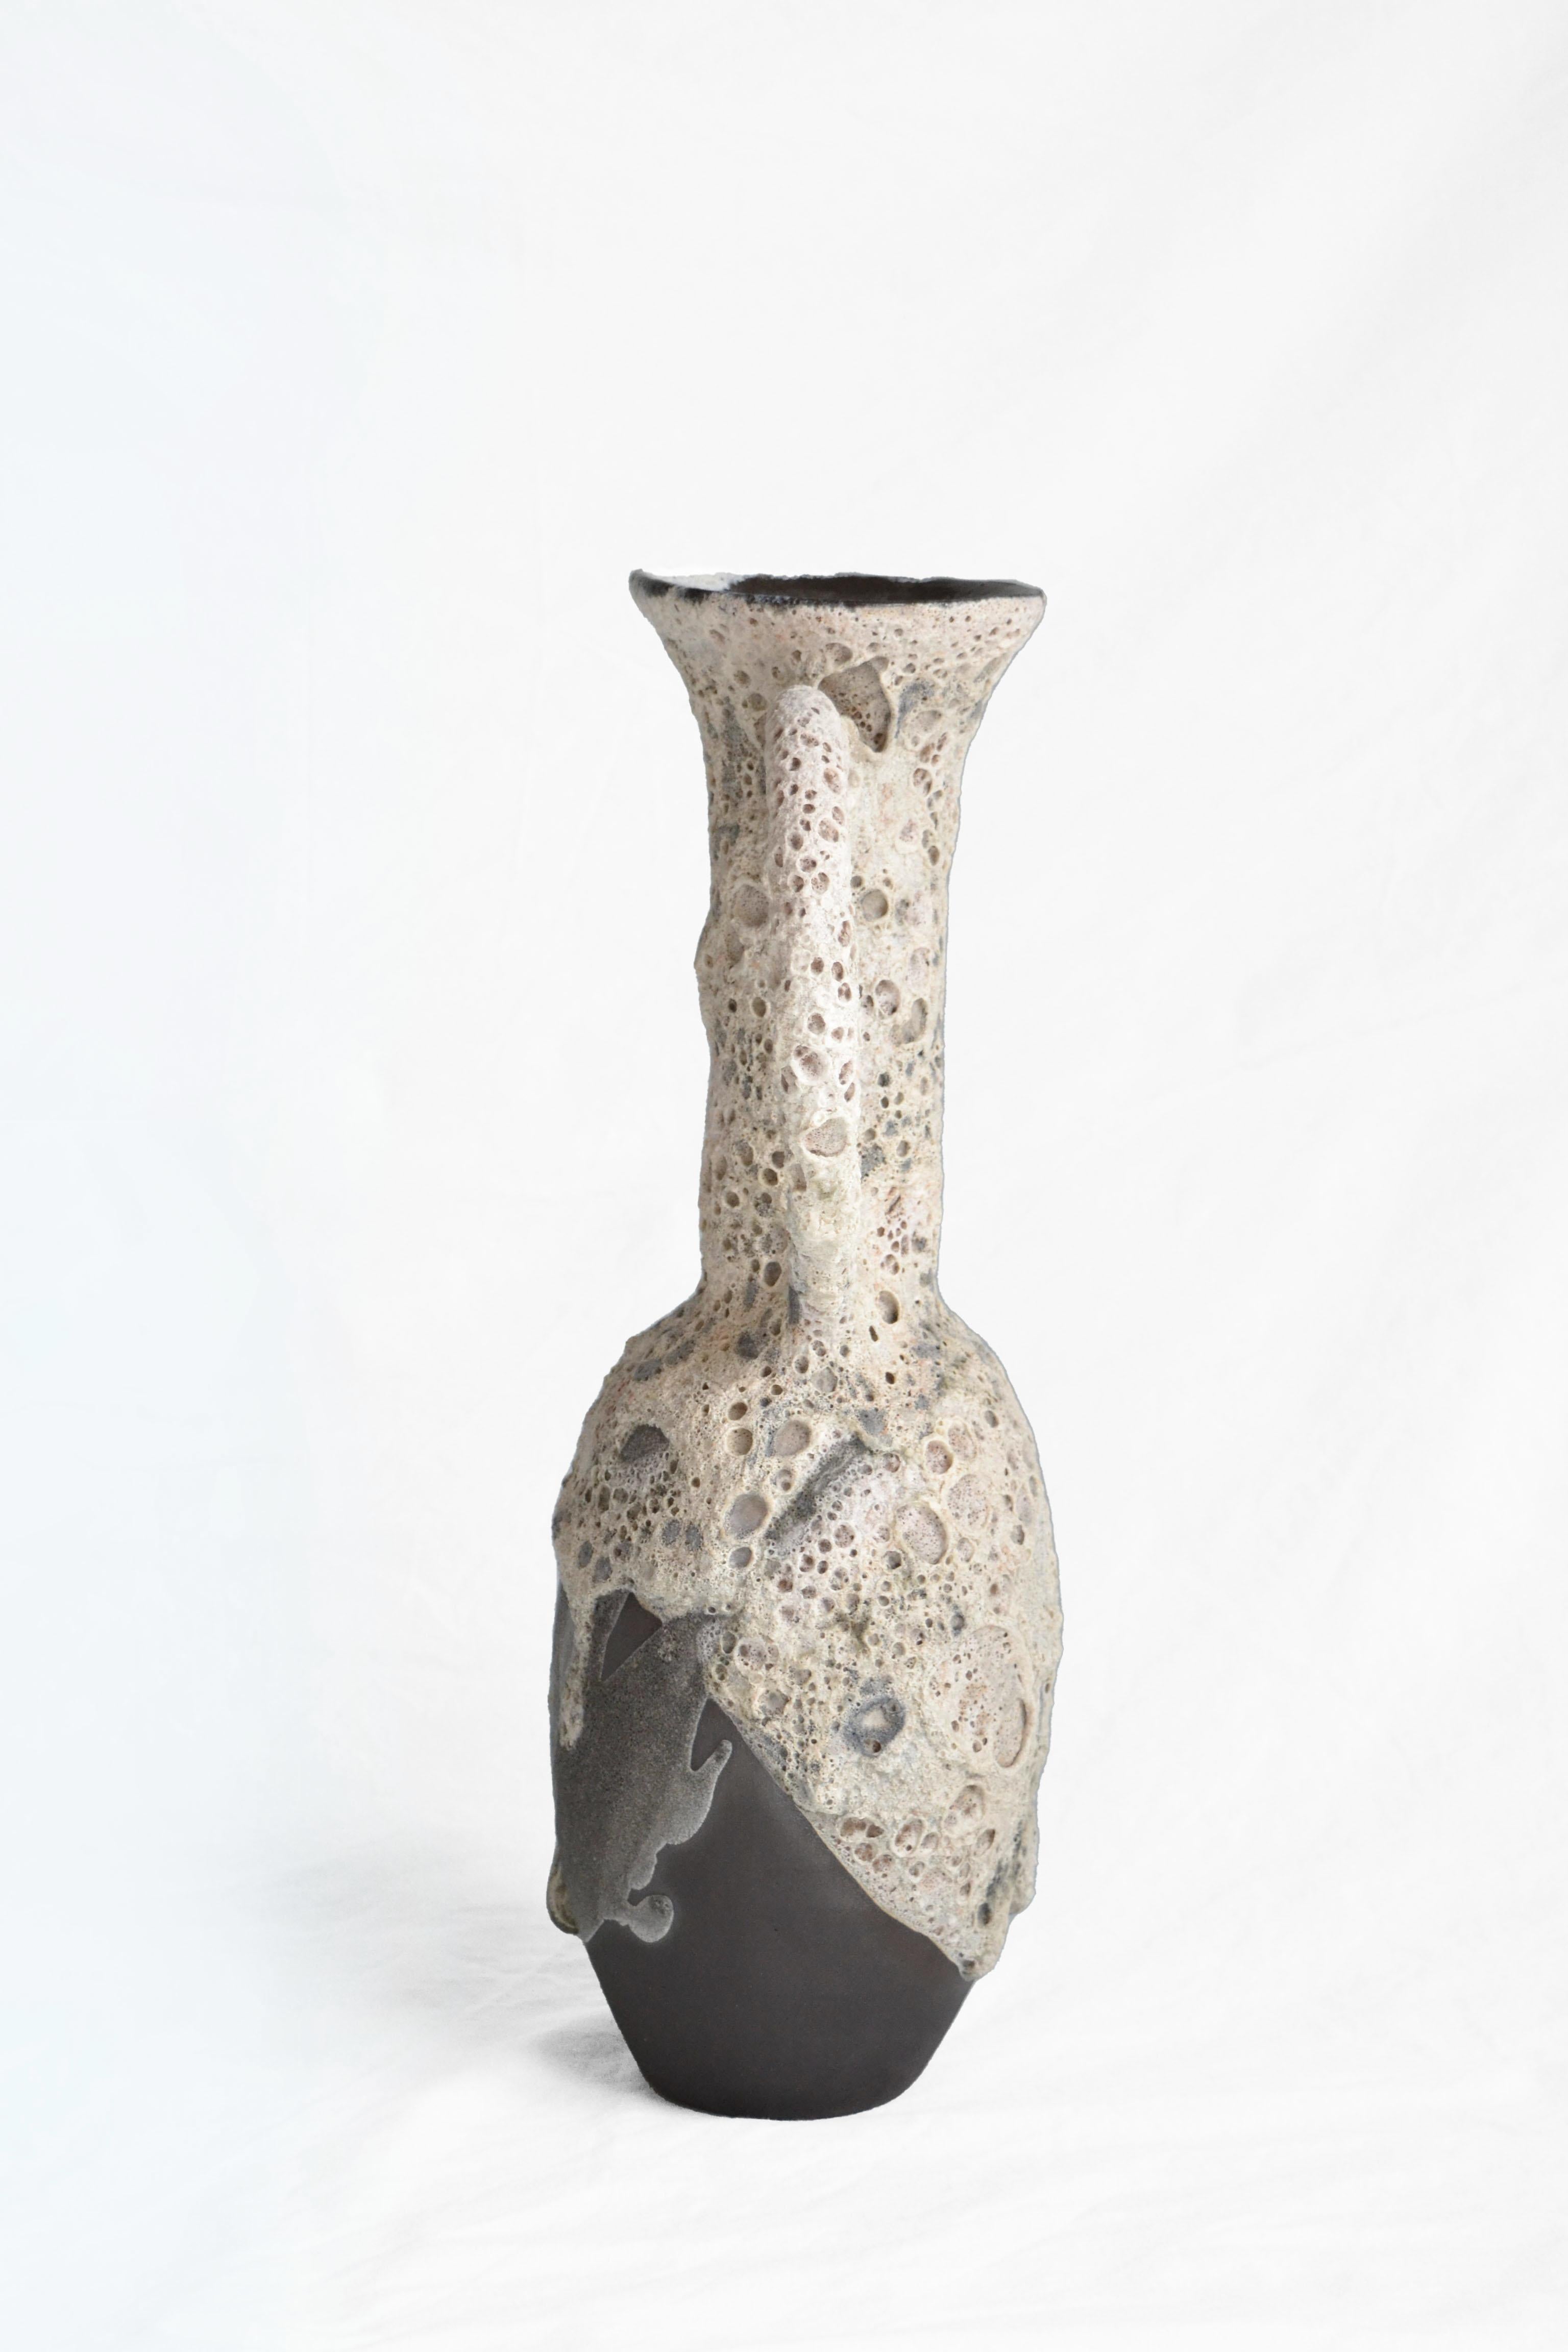 Carafe 1 vase by Anna Karountzou
Dimensions: W 26 x D 13 x H 40 cm
Materials: black stoneware clay, clear glaze inside, handmade crater glaze outside, fired at 1220

Born and based in Athens, Greece, with a background in conservation of works of